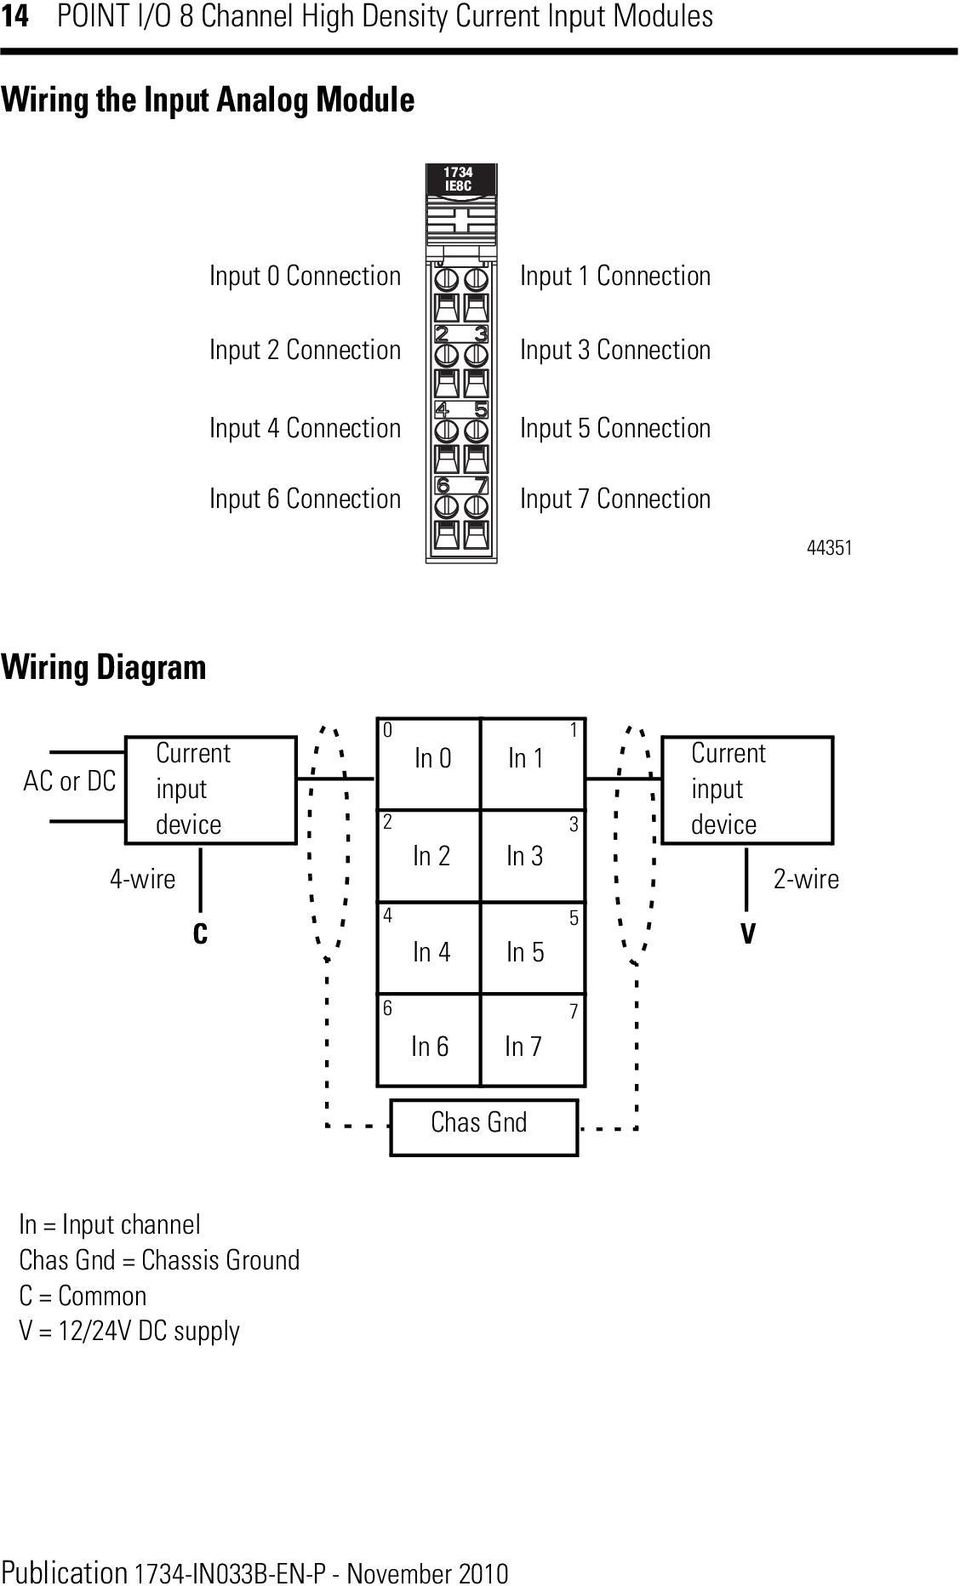 Connection 44351 Wiring Diagram AC or DC 4-wire Current input device C 0 1 In 0 In 1 2 3 In 2 In 3 4 5 In 4 In 5 Current